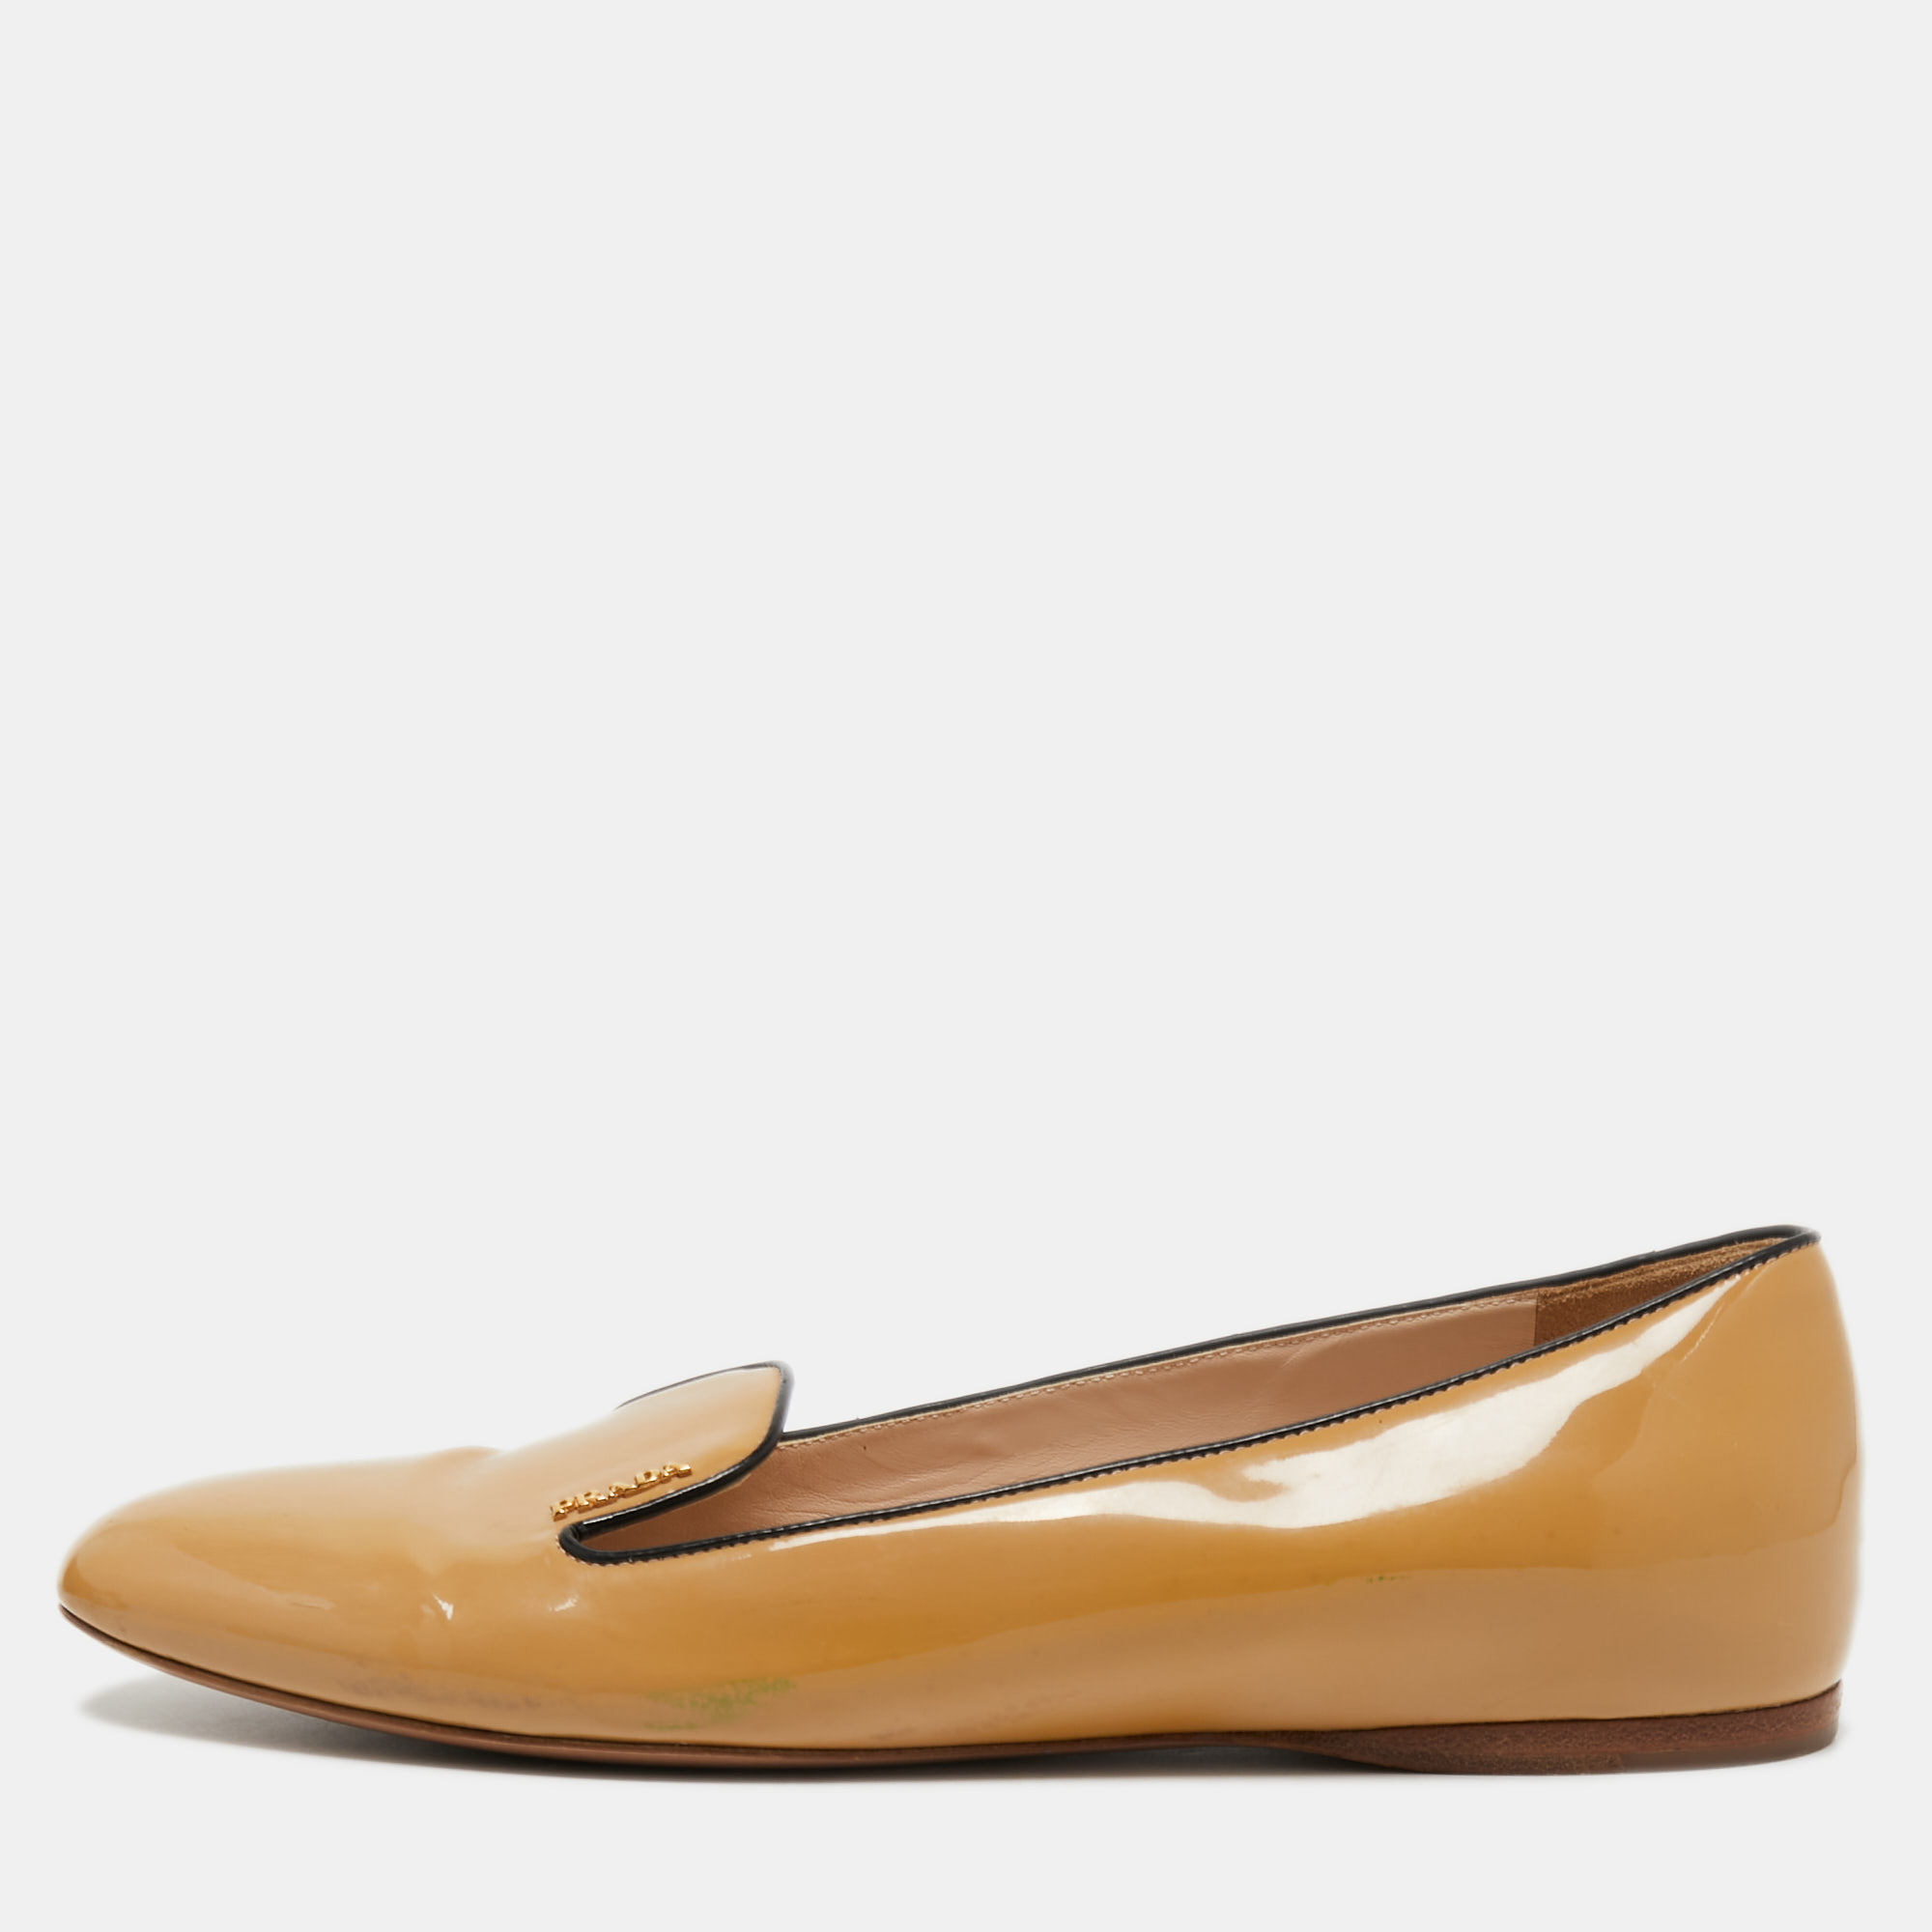 Pre-owned Prada Beige Patent Leather Ballet Flats Size 40